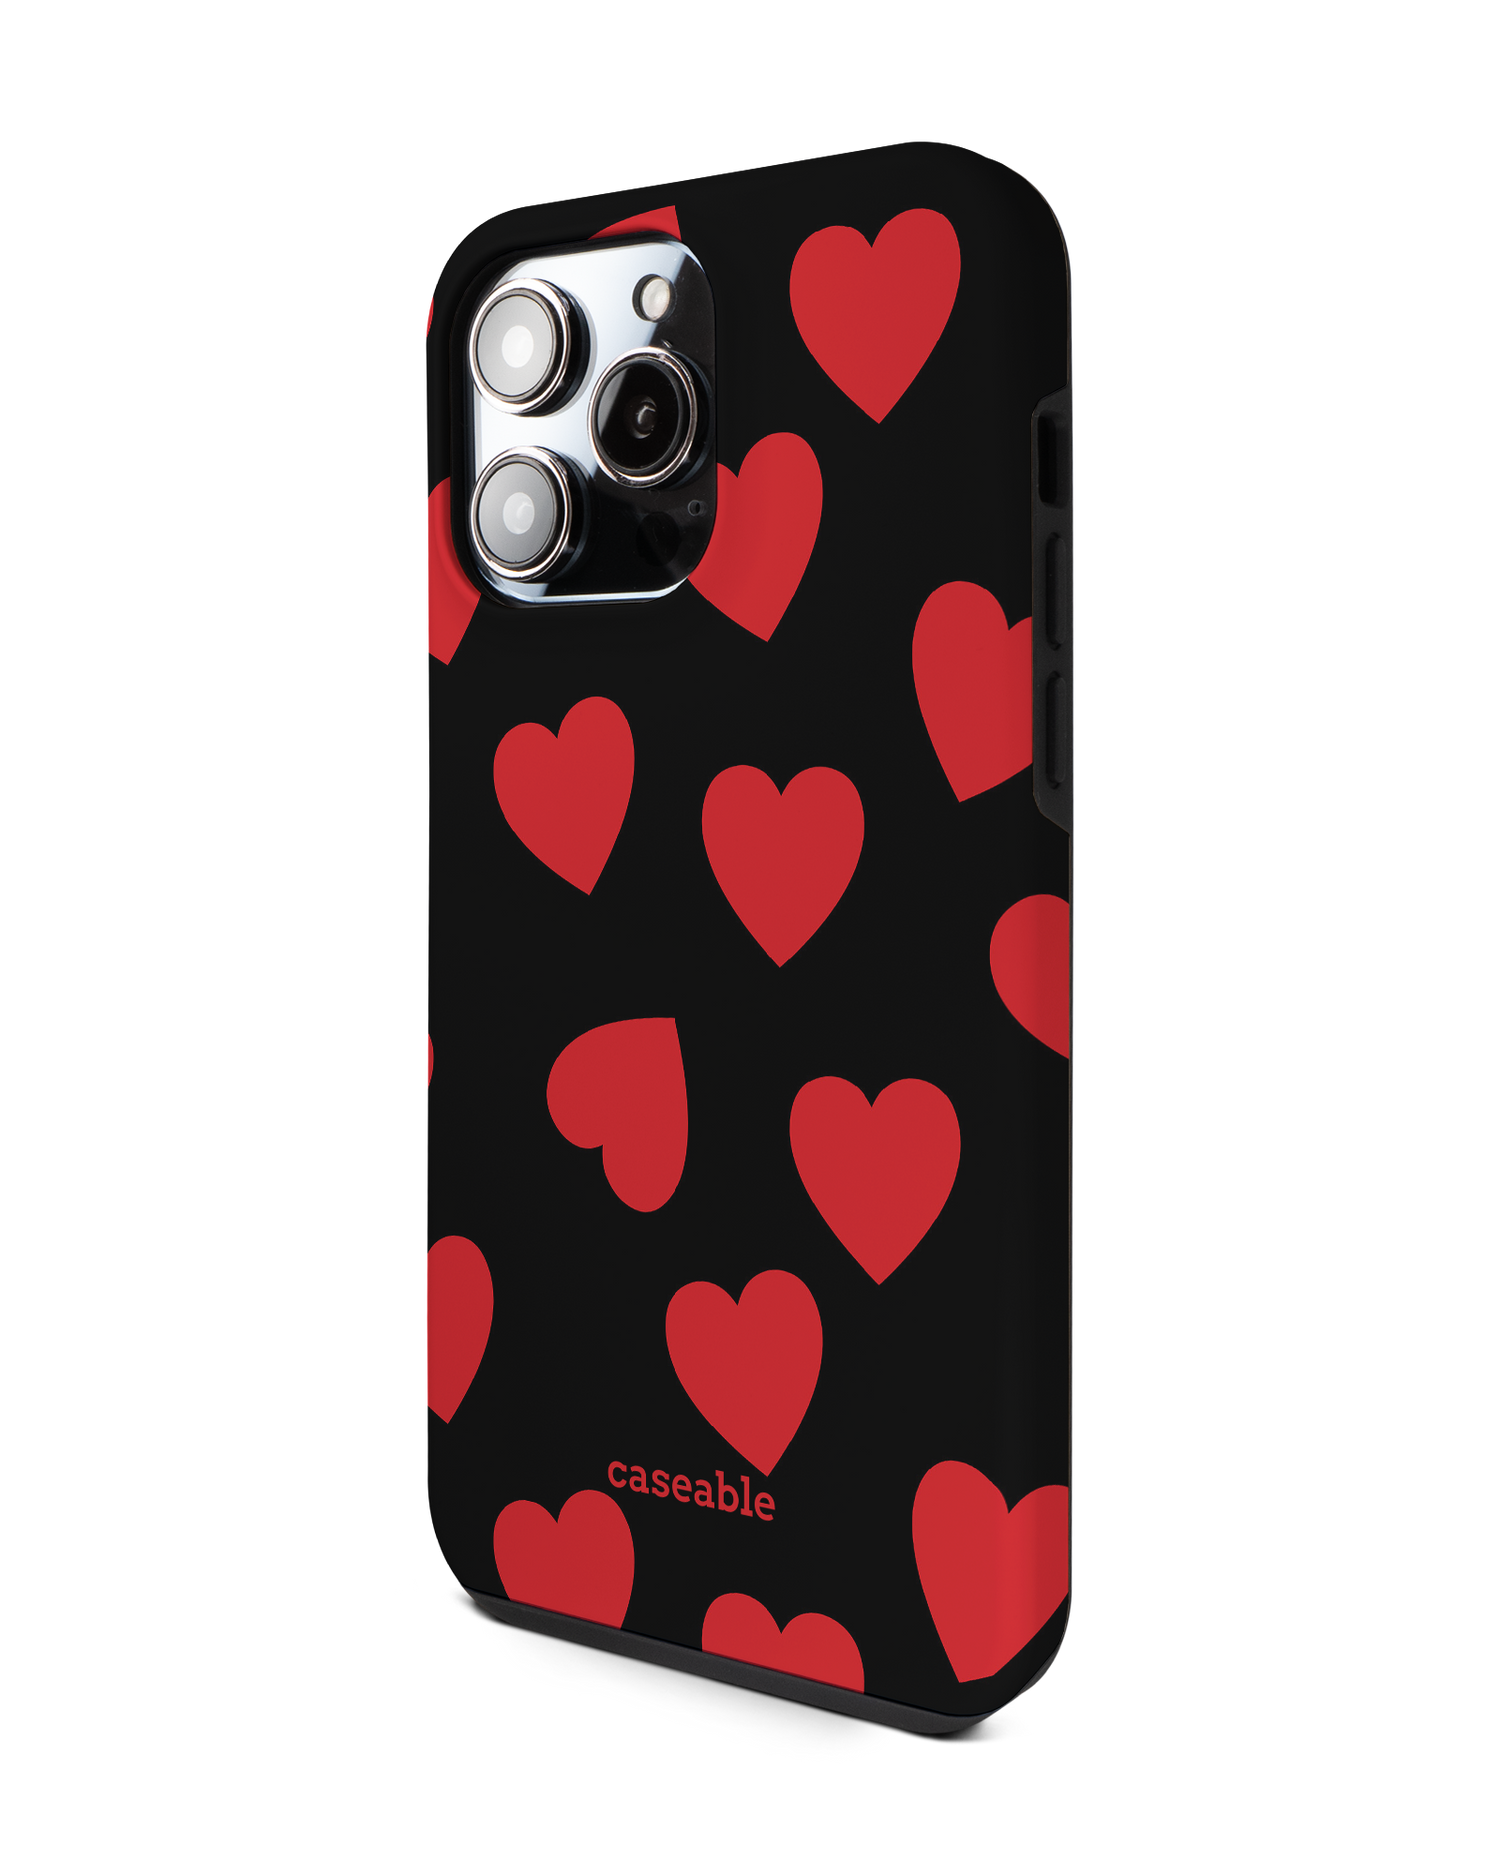 Repeating Hearts Premium Phone Case for Apple iPhone 14 Pro Max: View from the right side